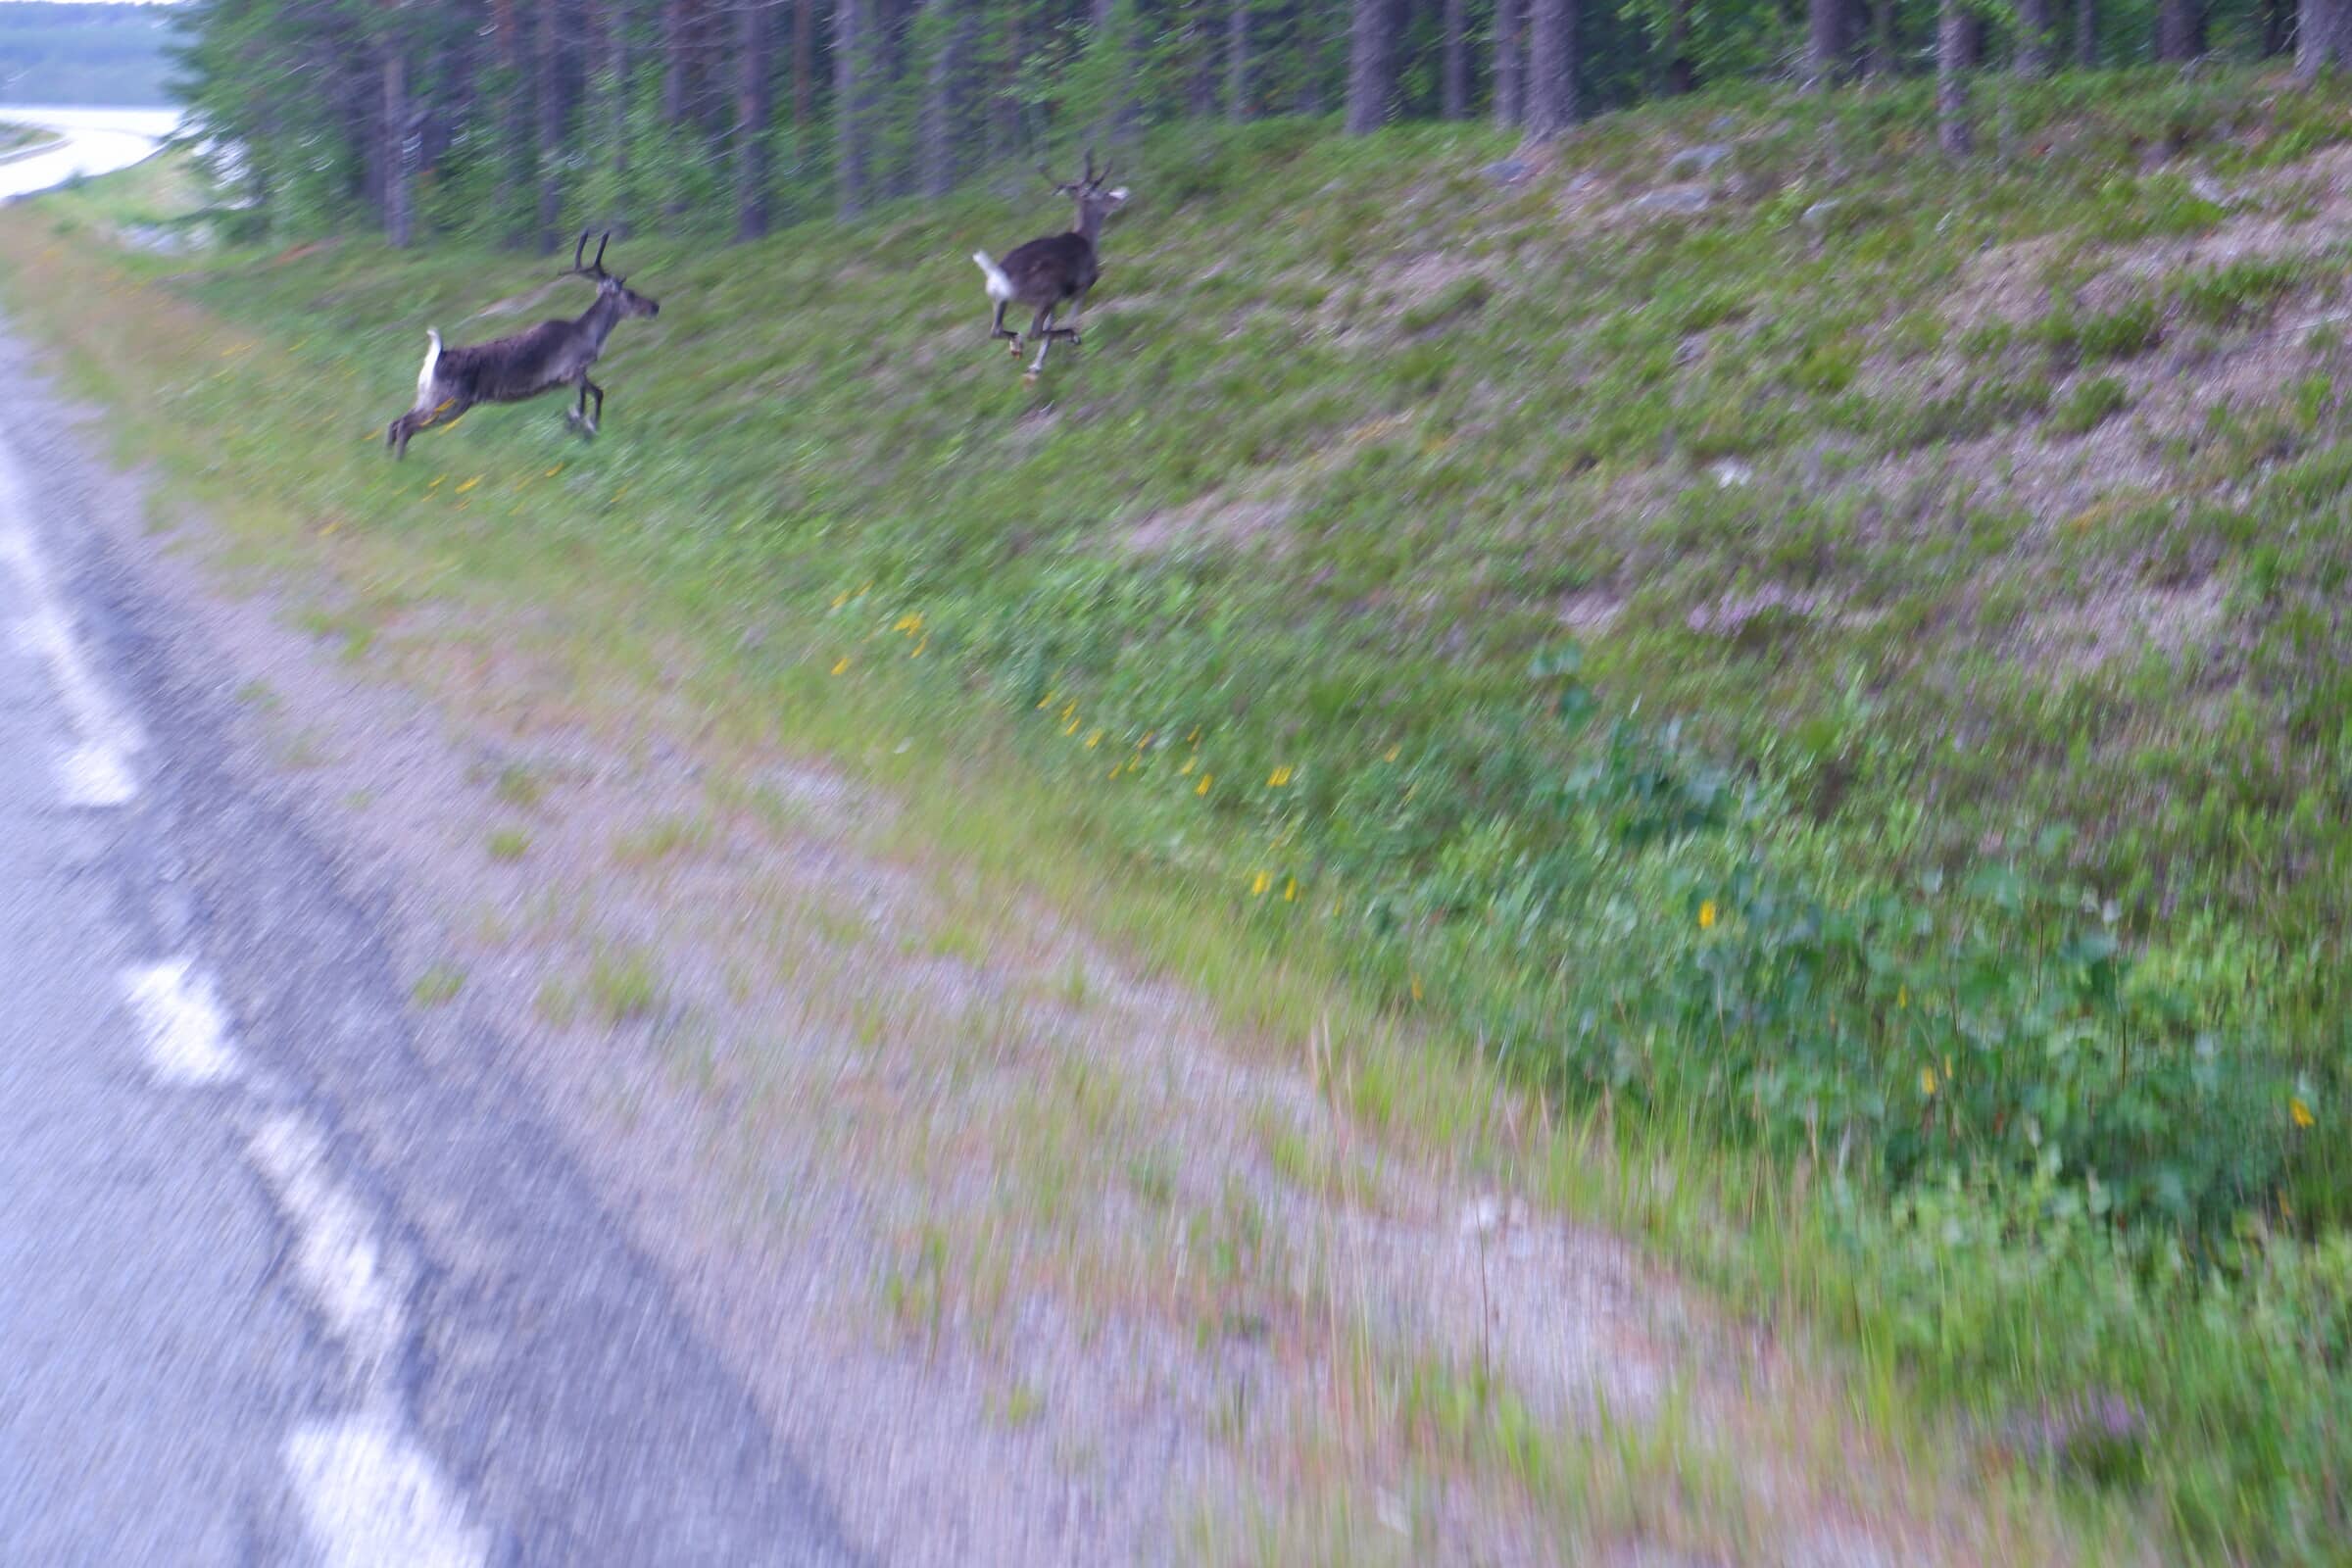 Terrible picture of a reindeer running away.